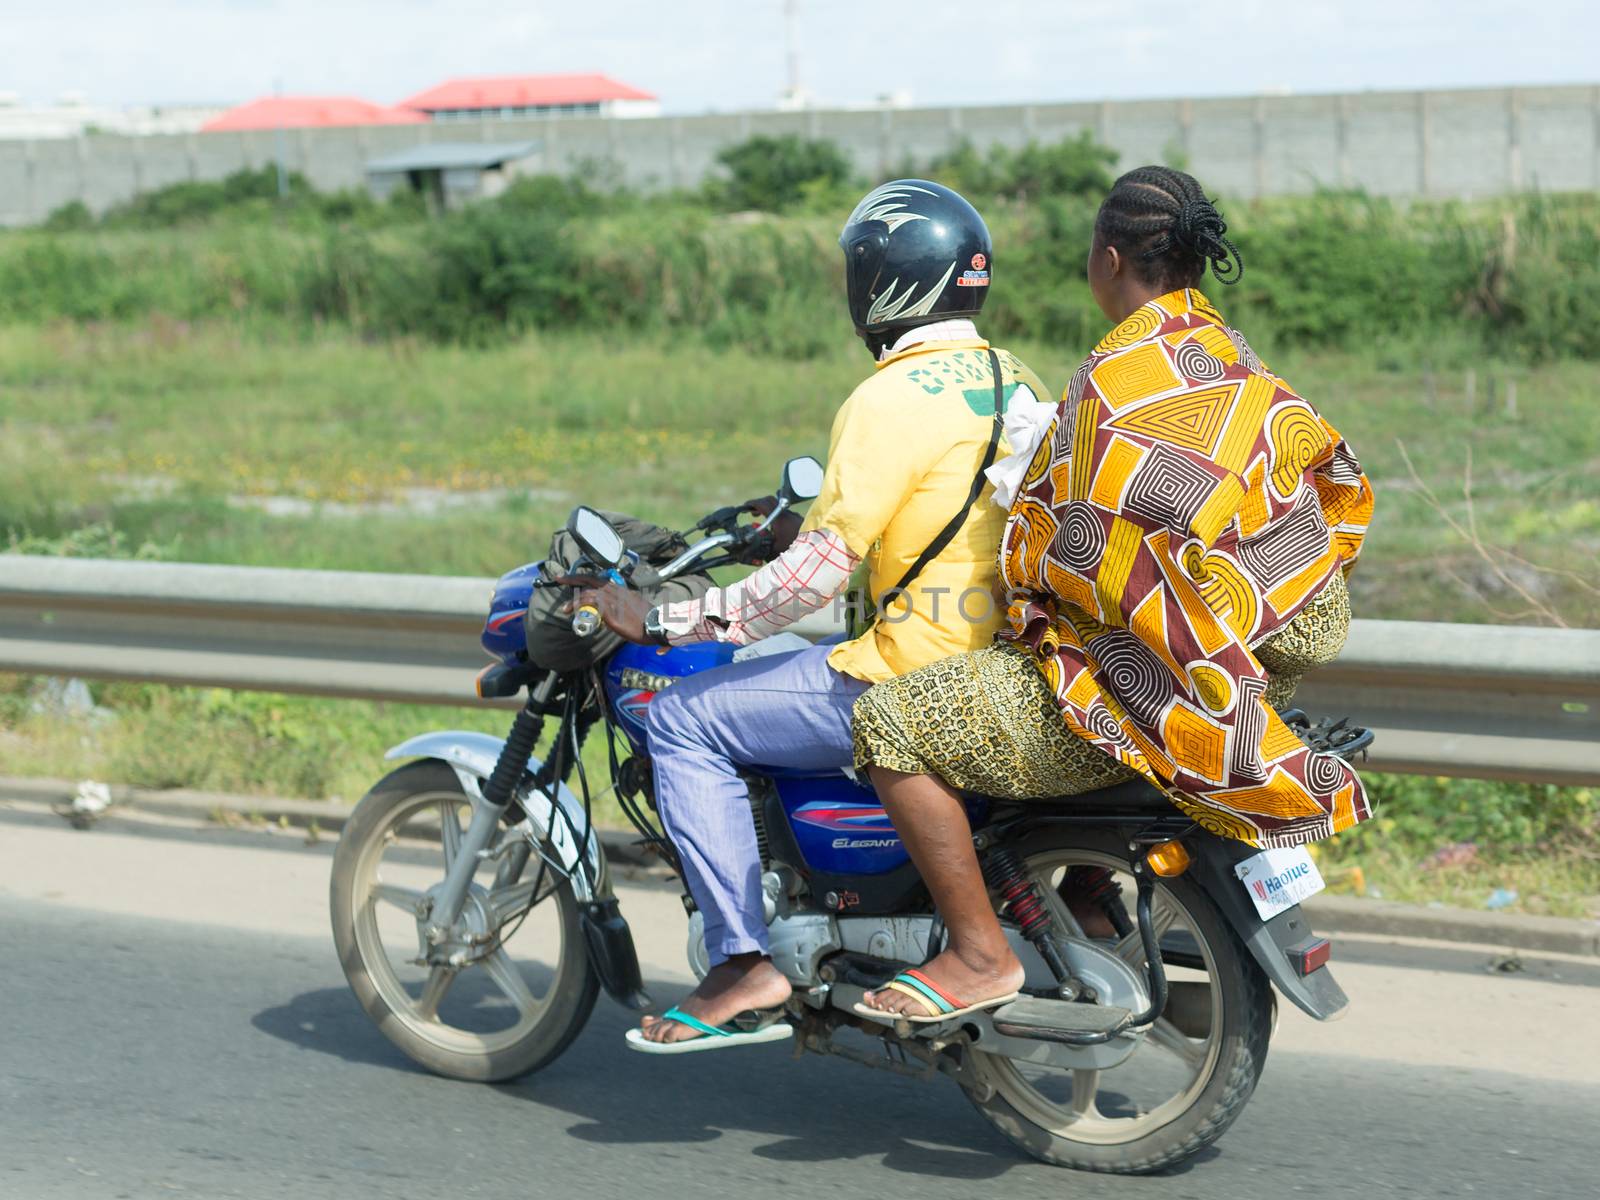 Cotonou, Benin: May 26: A woman rides a hired Motorcycle taxi, the most common means of hired transportation in the city, on May 26, 2015 in Cotonou, Benin.